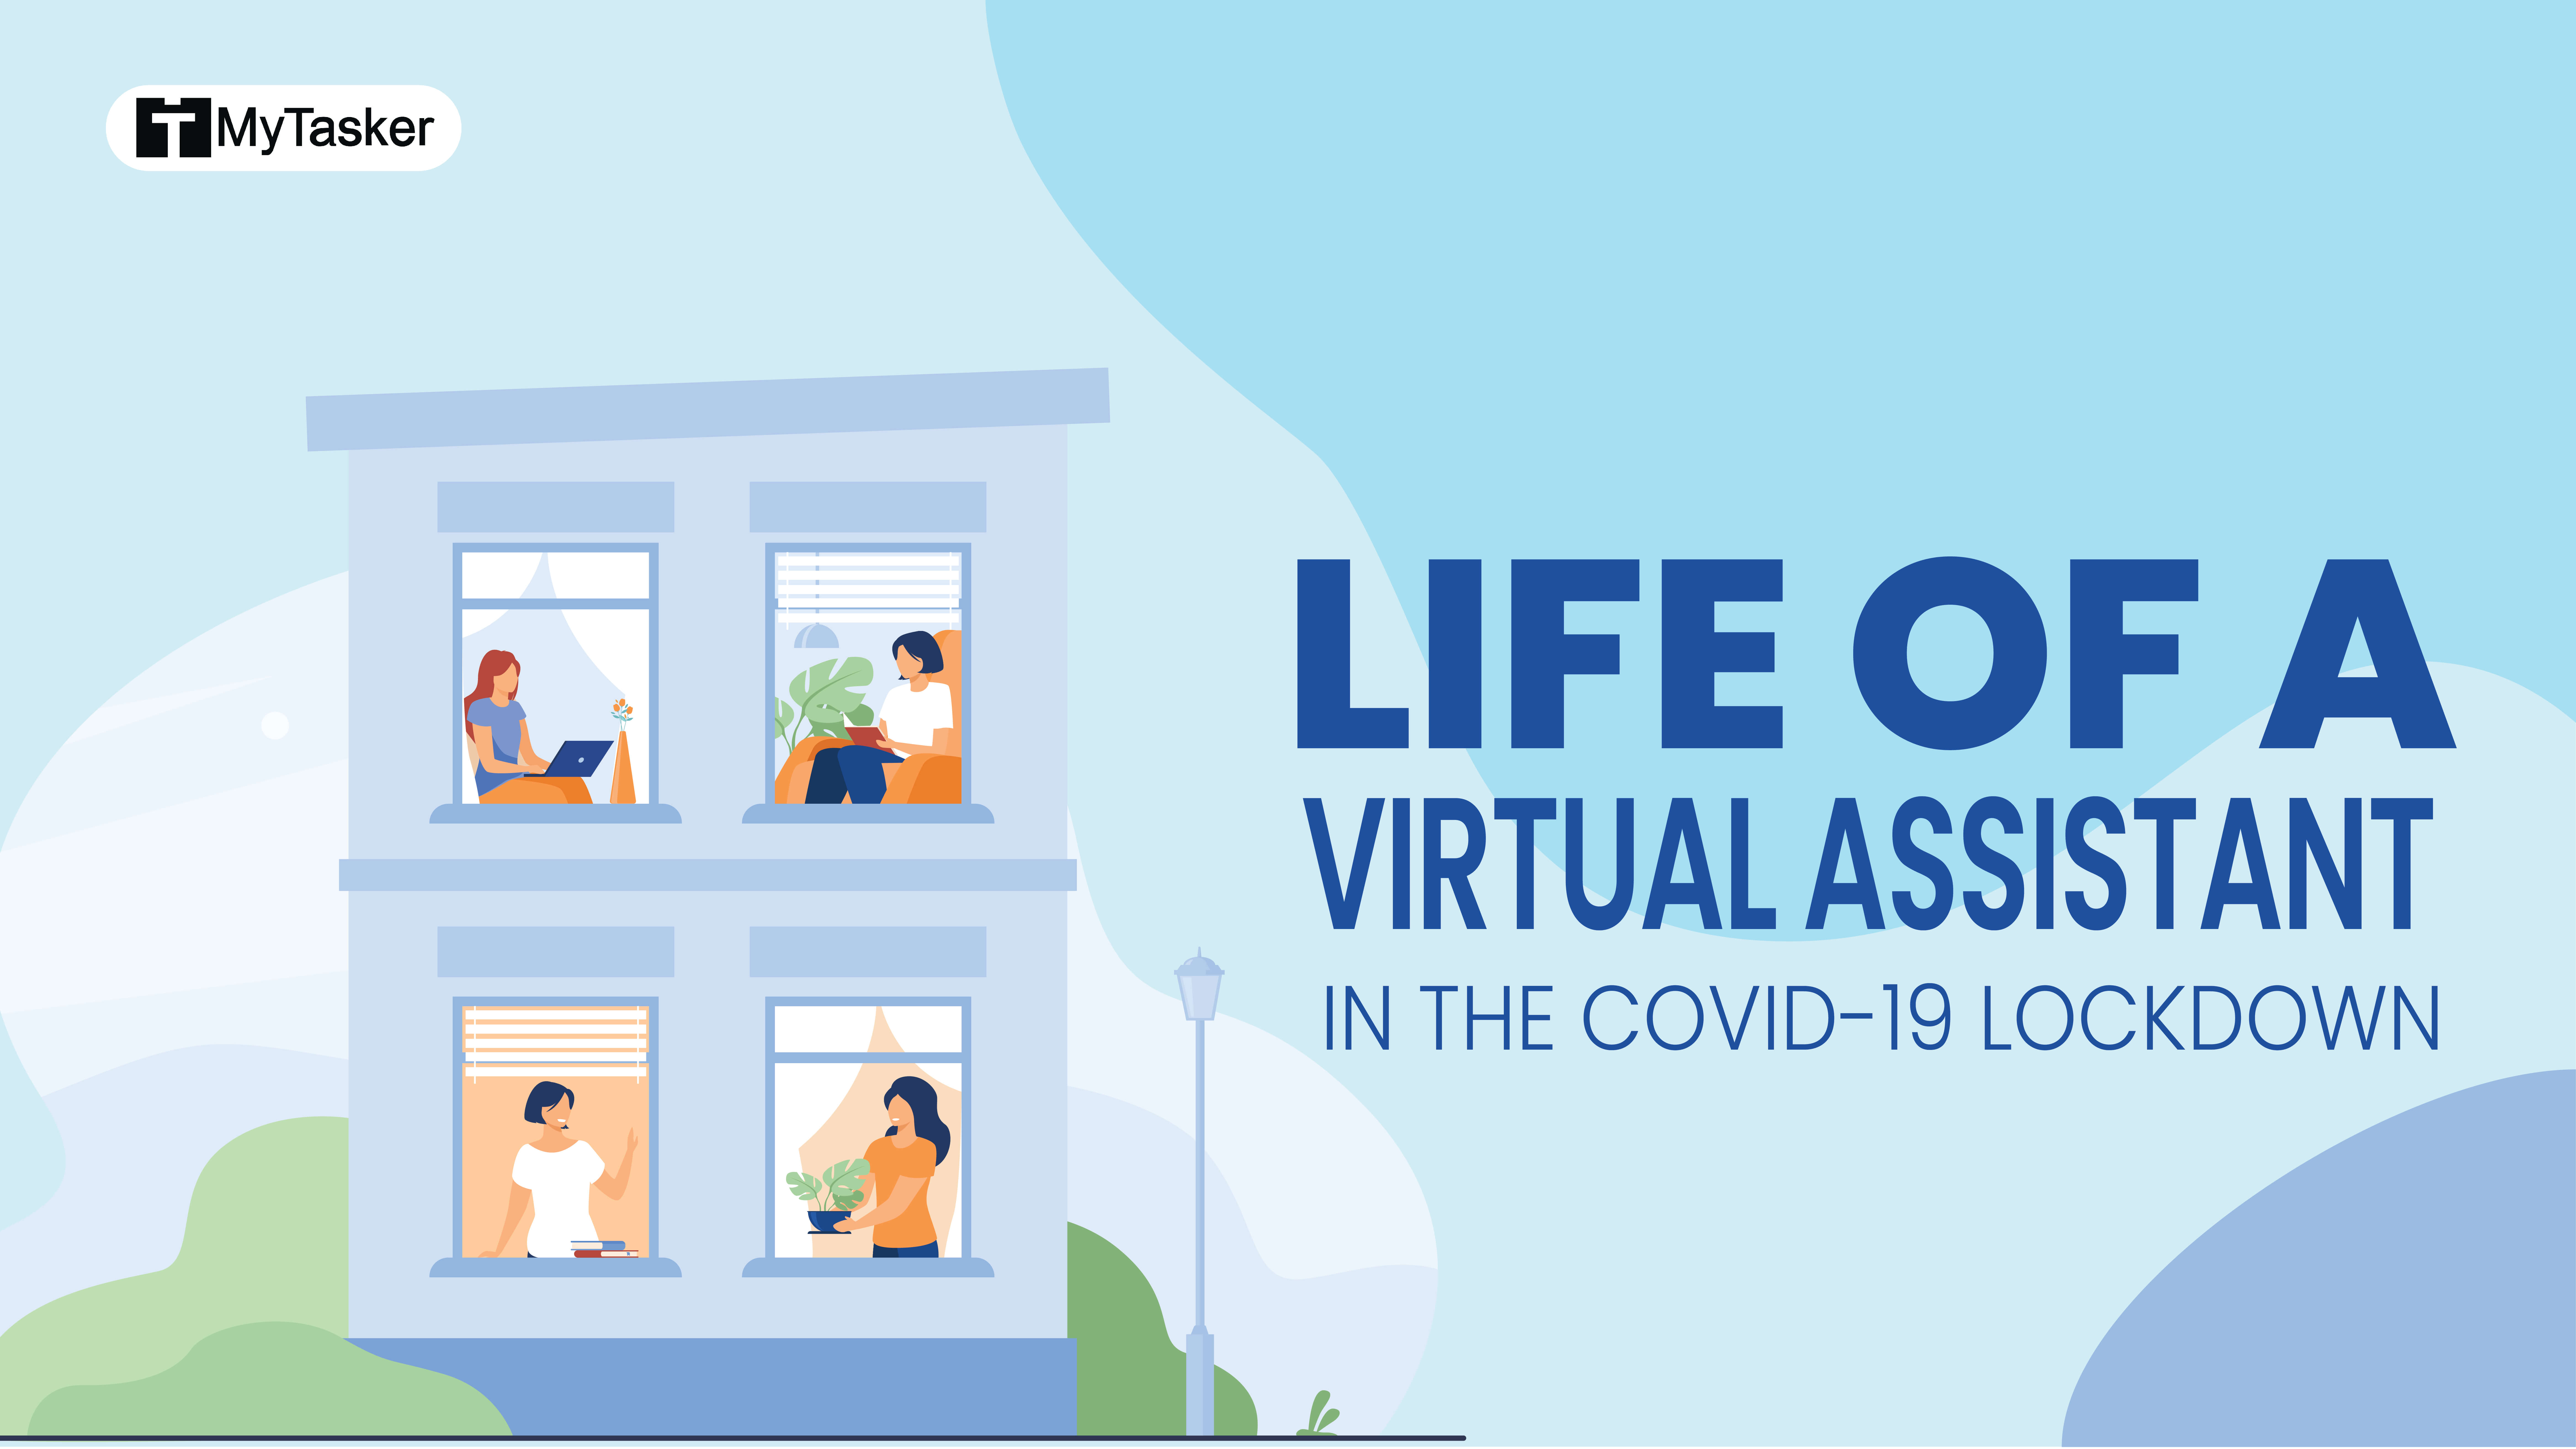 Glimpses Into The Life of A Virtual Assistant During COVID-19